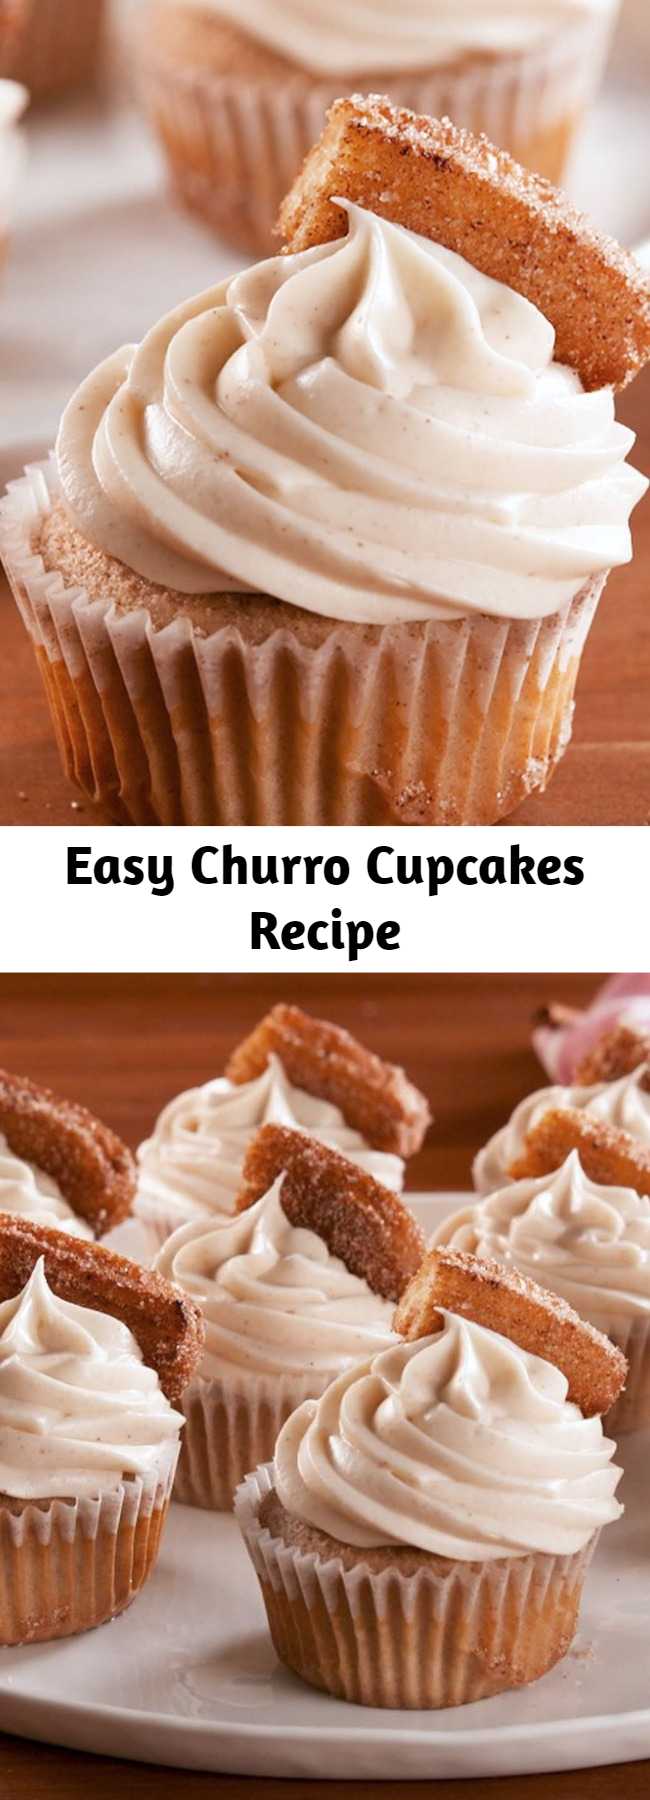 Easy Churro Cupcakes Recipe - These cinnamon-sugar cupcakes use melted butter, which makes them taste more like the fried treat they are topped with. If you can't find frozen or premade churros, you can always make our easy churro recipe! #easy #recipe #churro #cupcakes #churrocupcakes #cinnamon #homemade #dessert